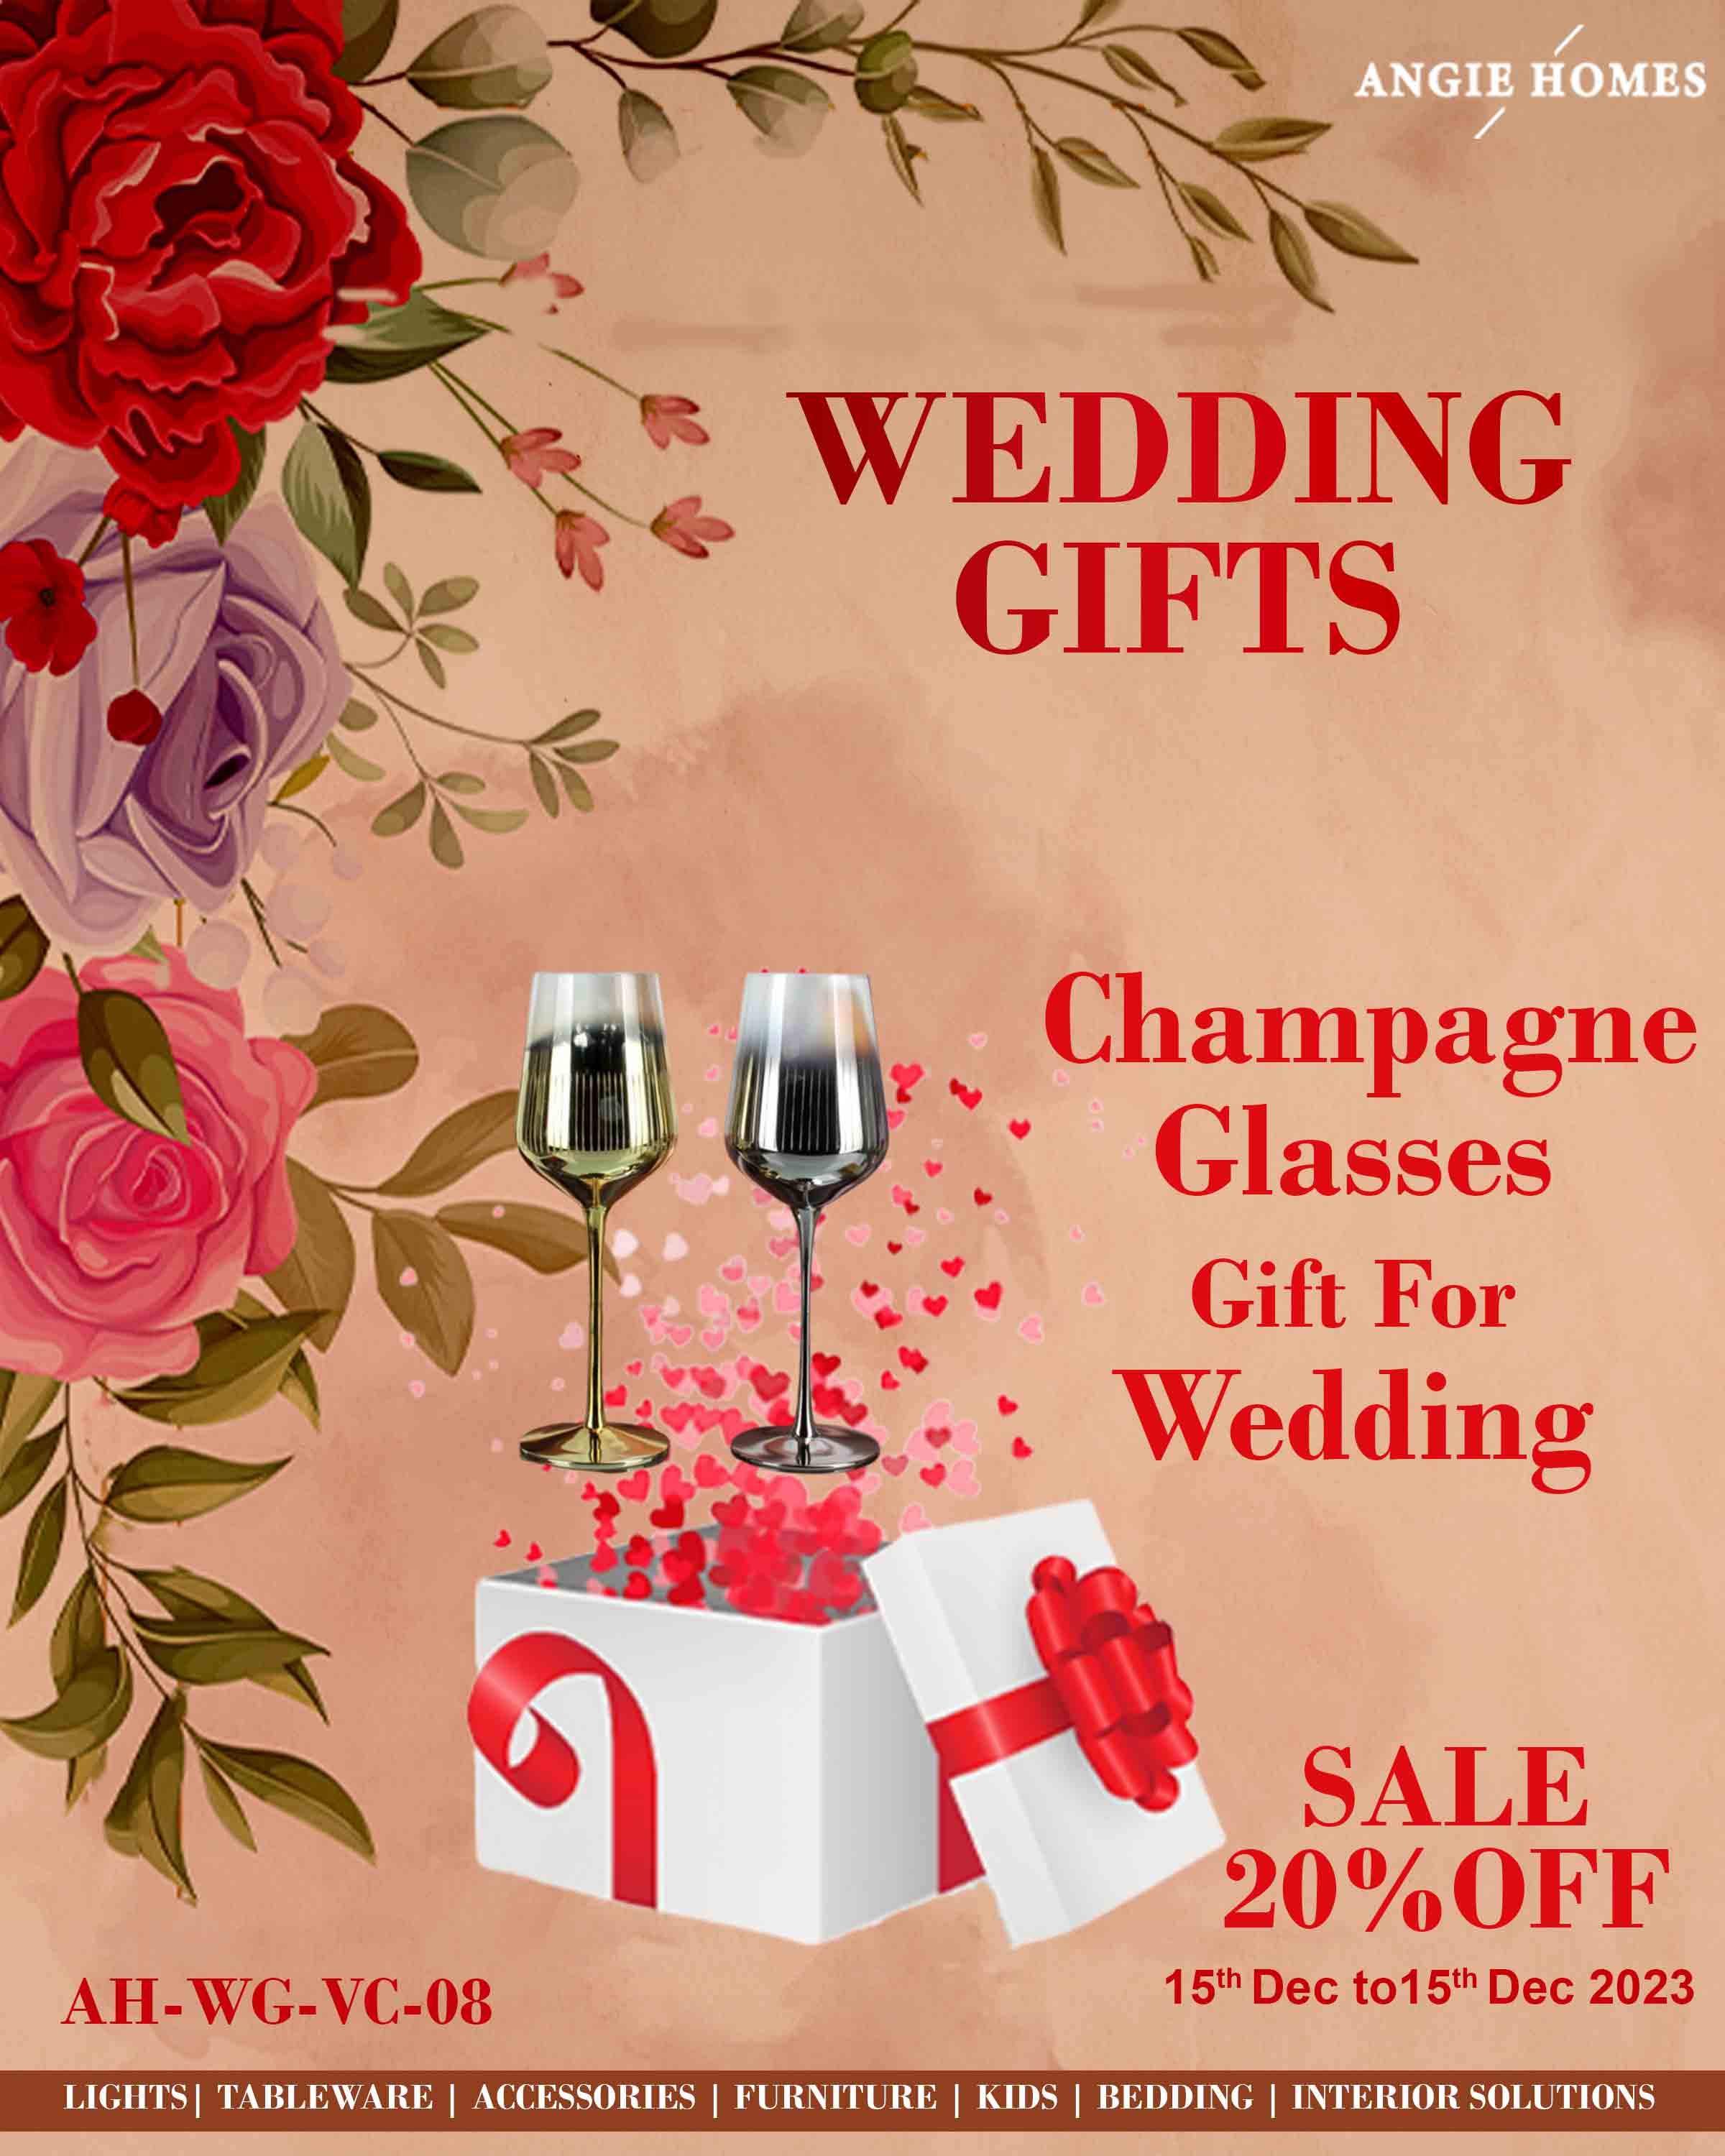 BRIDE AND GROOM CHAMPAGNE GLASSES SETS FOR WEDDING | MARRIAGE GIFT VOUCHER ANGIE HOMES